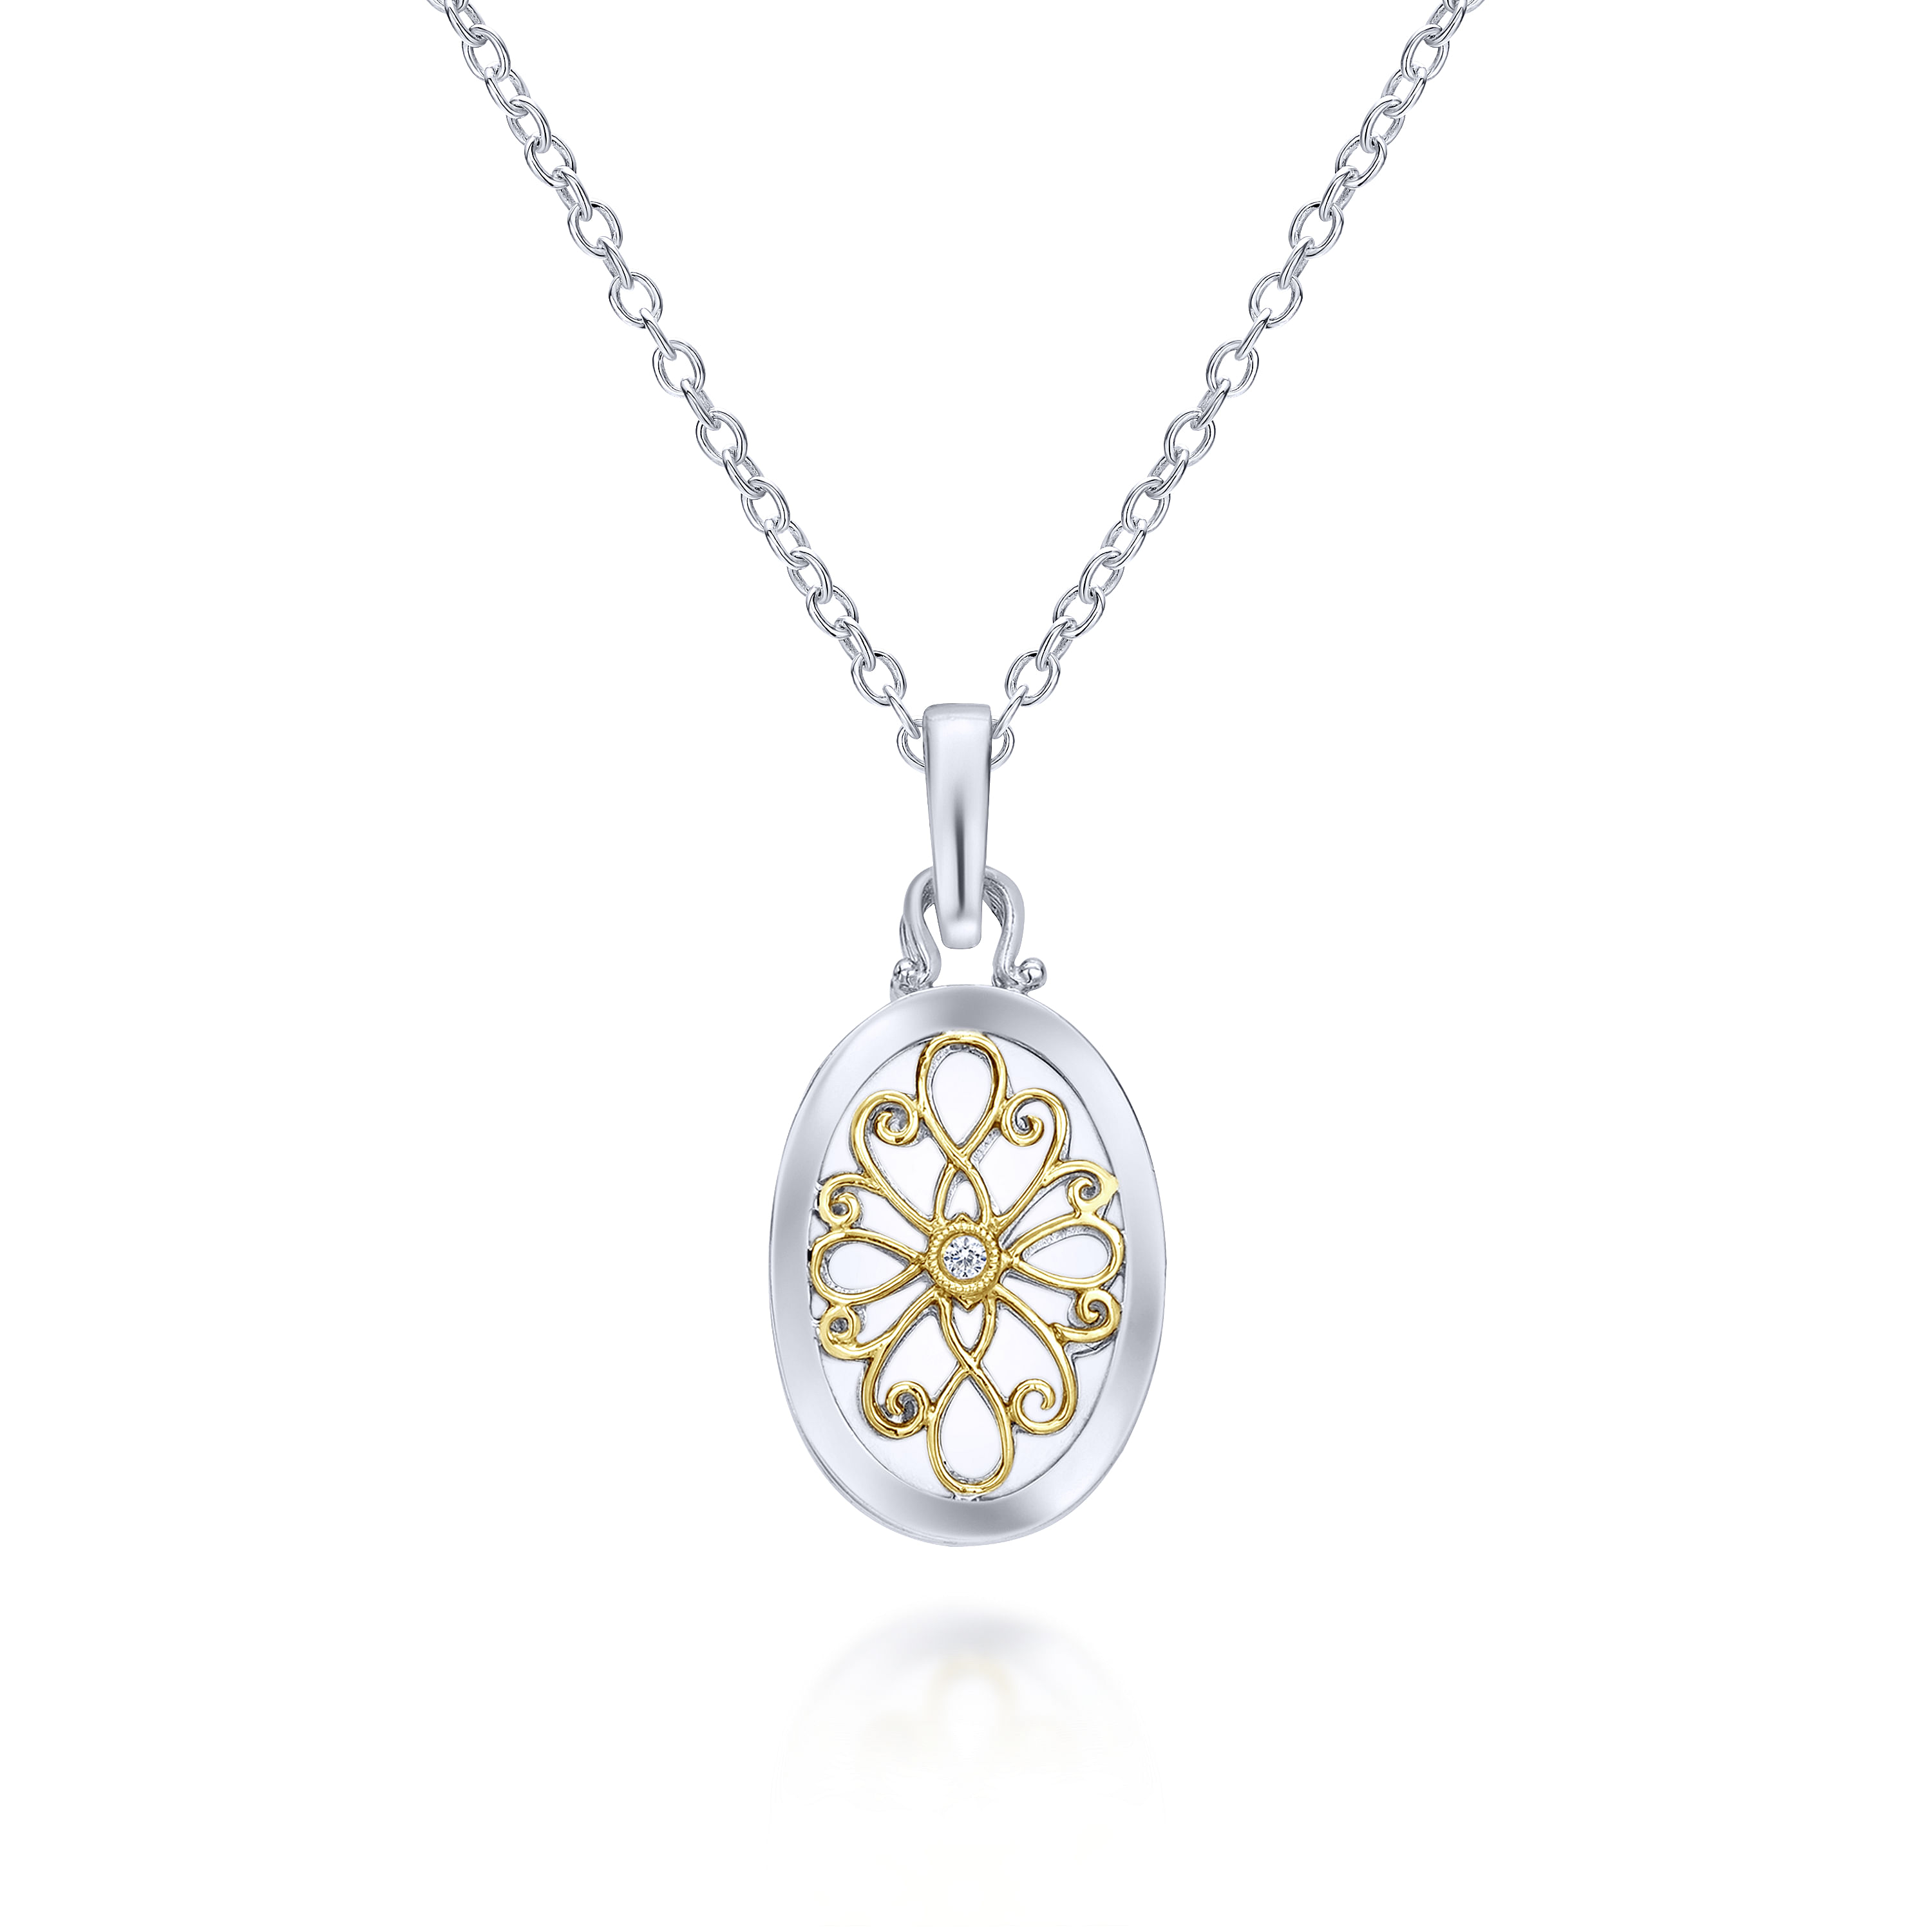 18 inch 925 Sterling Silver 18K Yellow Gold Oval Filigree Diamond Pendant Necklace